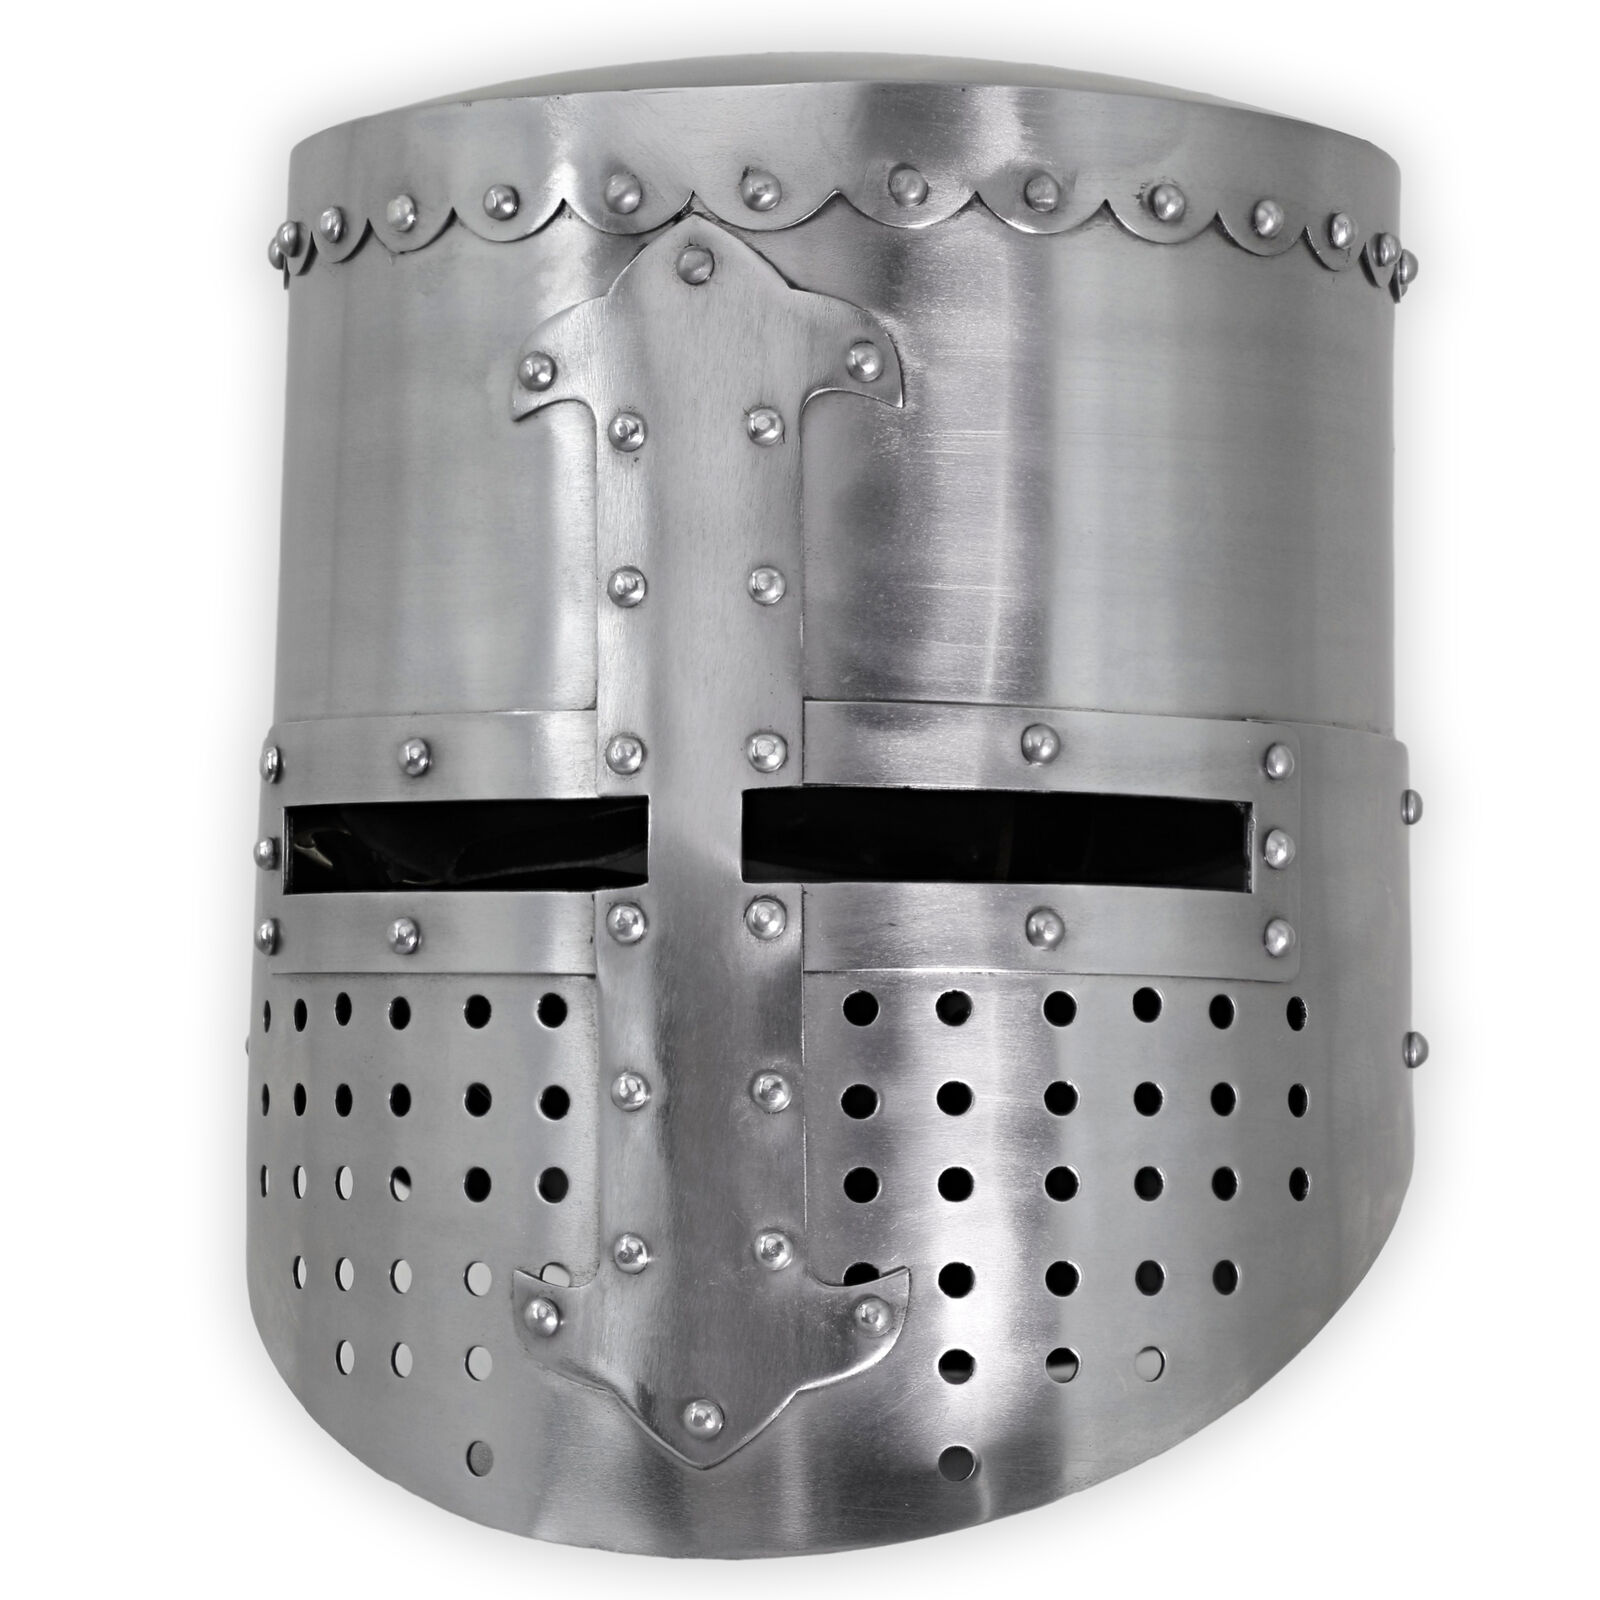 Medieval Knights Templar Crusader Helmets Collection: Forged Carbon Steel, Brass